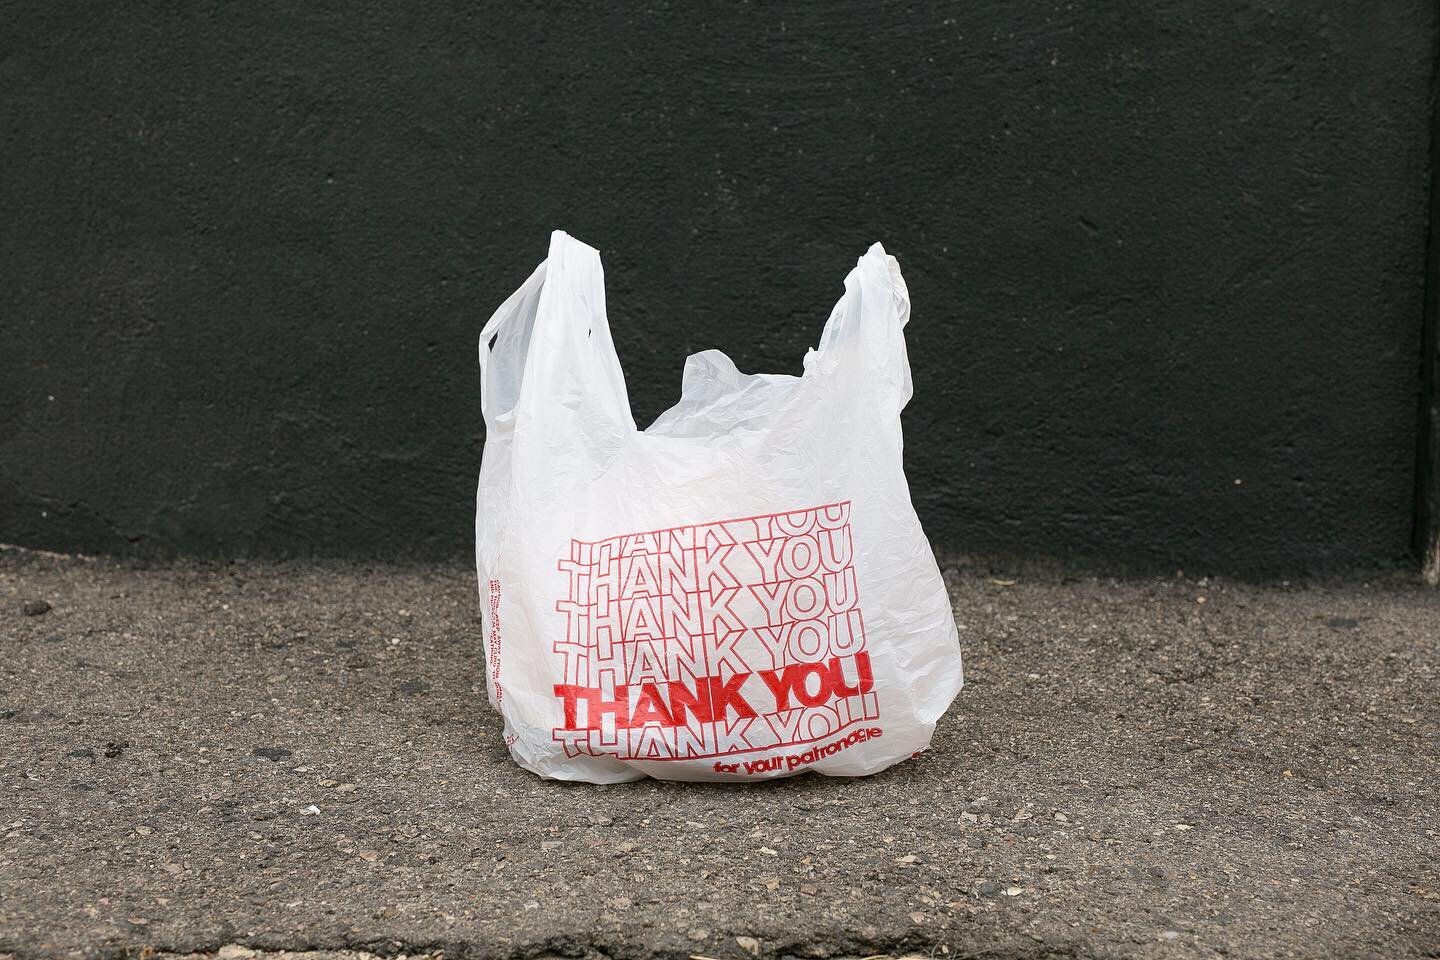 Thanks but no thanks. Here are some shocking statistics regarding the use of plastic bags:

1. Less than 1% of plastic bags are recycled
2. About 10% of all bags produced end up in the ocean
3. Placed end to end, this year's production would circle t